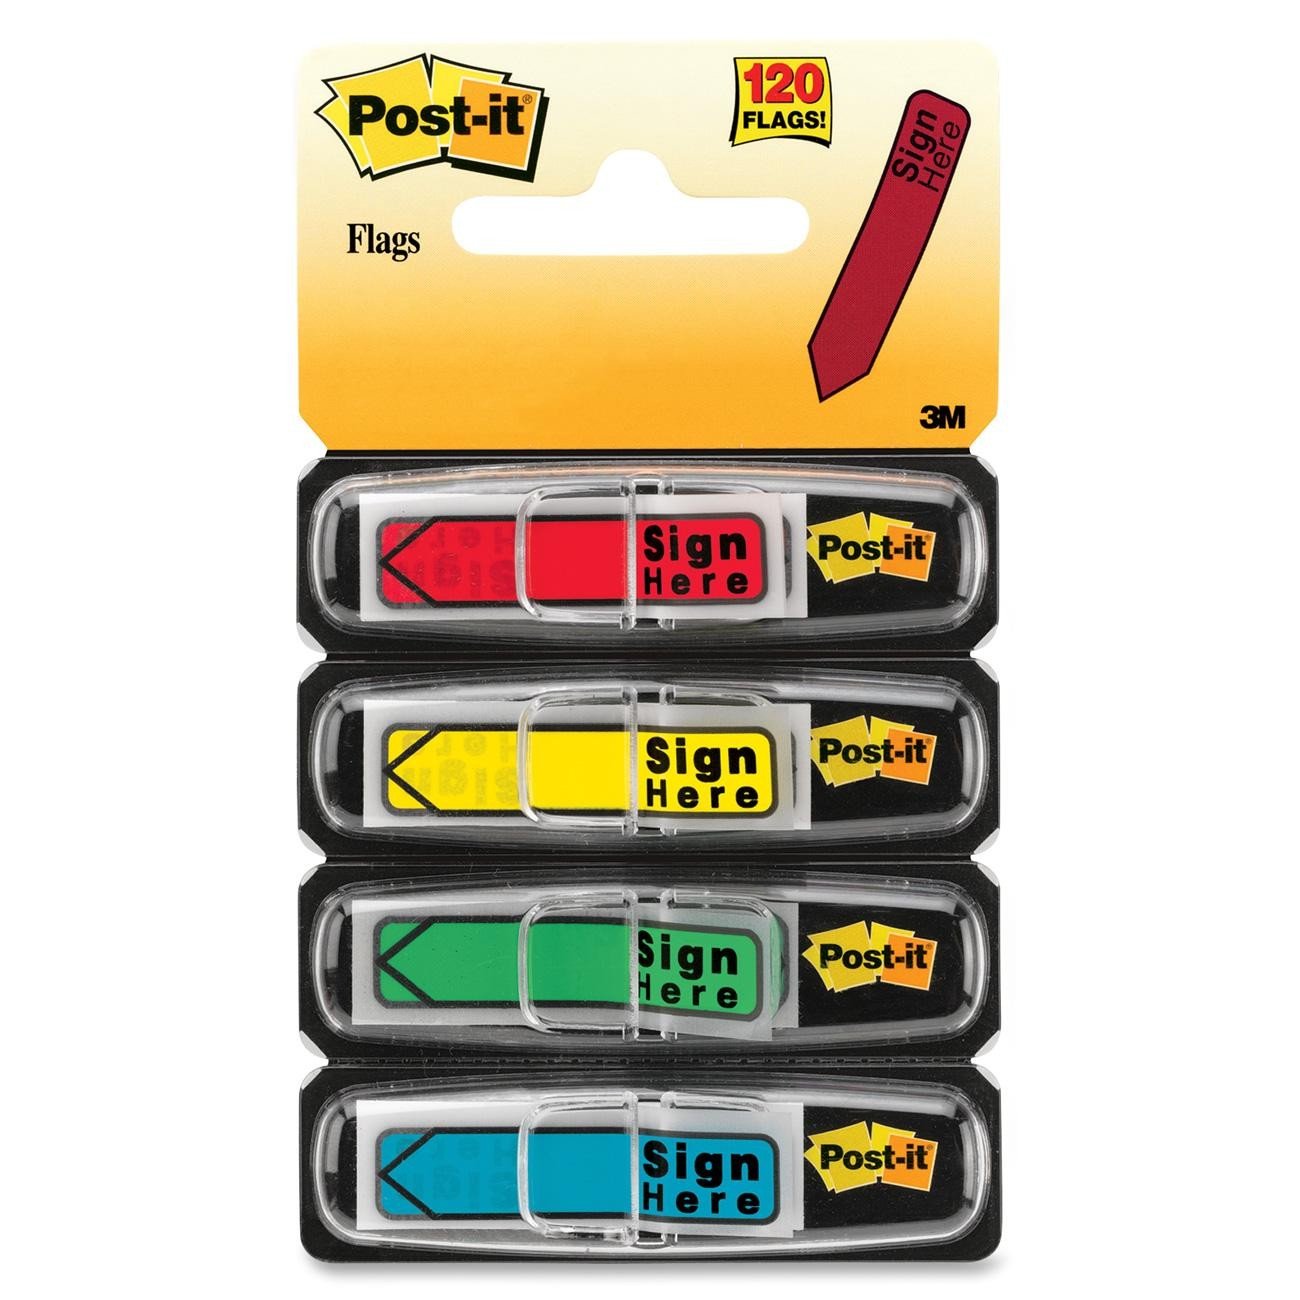 Post-it Message Flags ''''Sign Here'''', Assorted Colors, 1/2 in. Wide - 120/pack